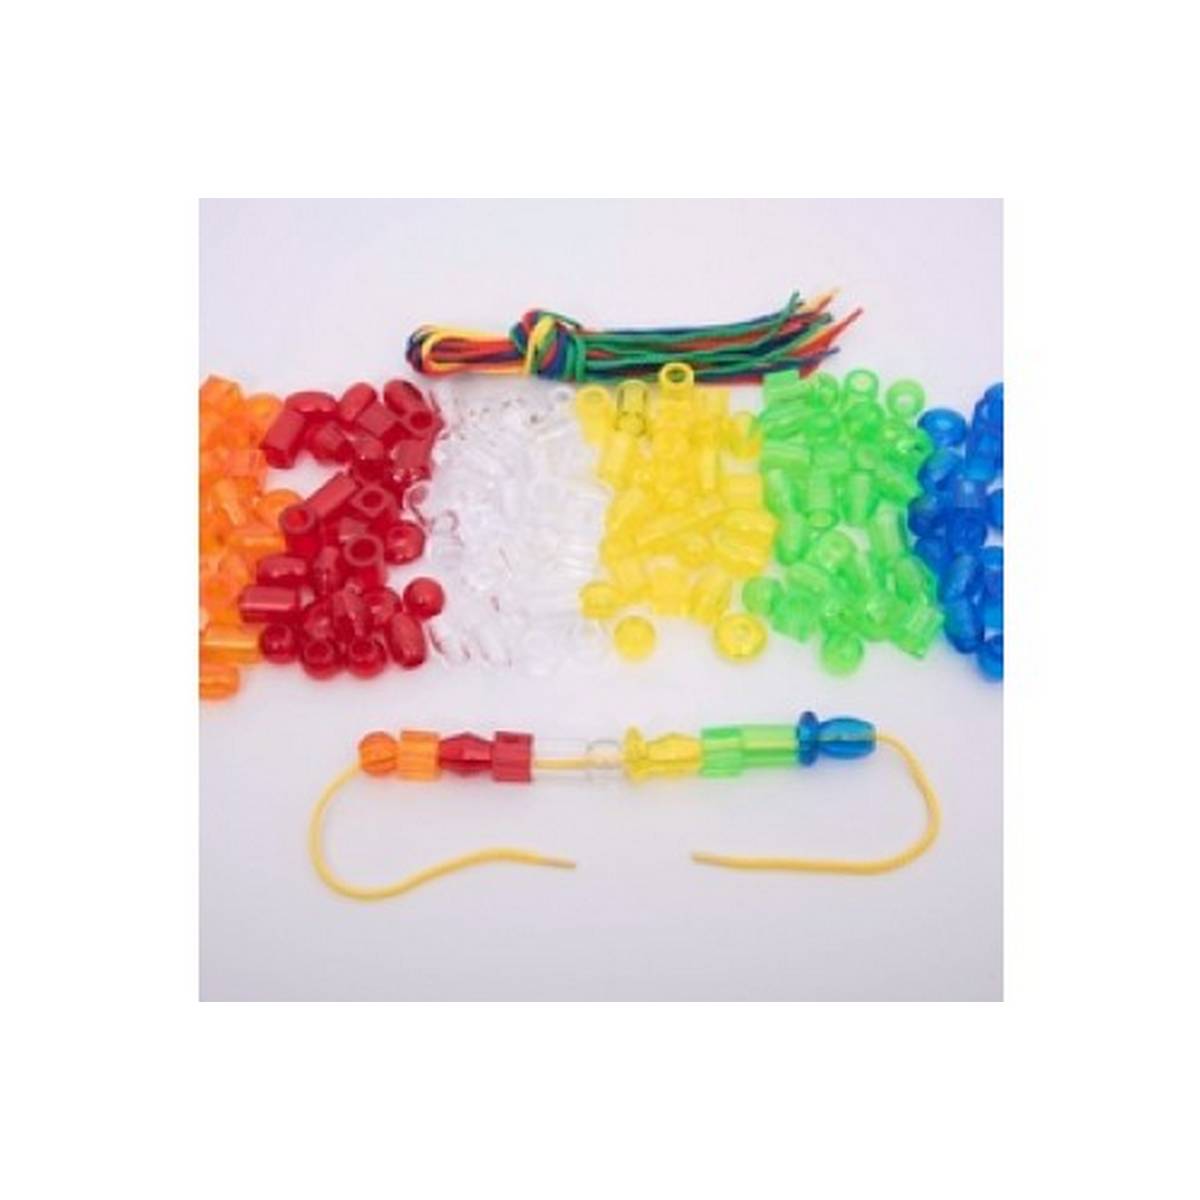 Translucent Jumbo Lacing Beads - Pack of 180 + 12 laces